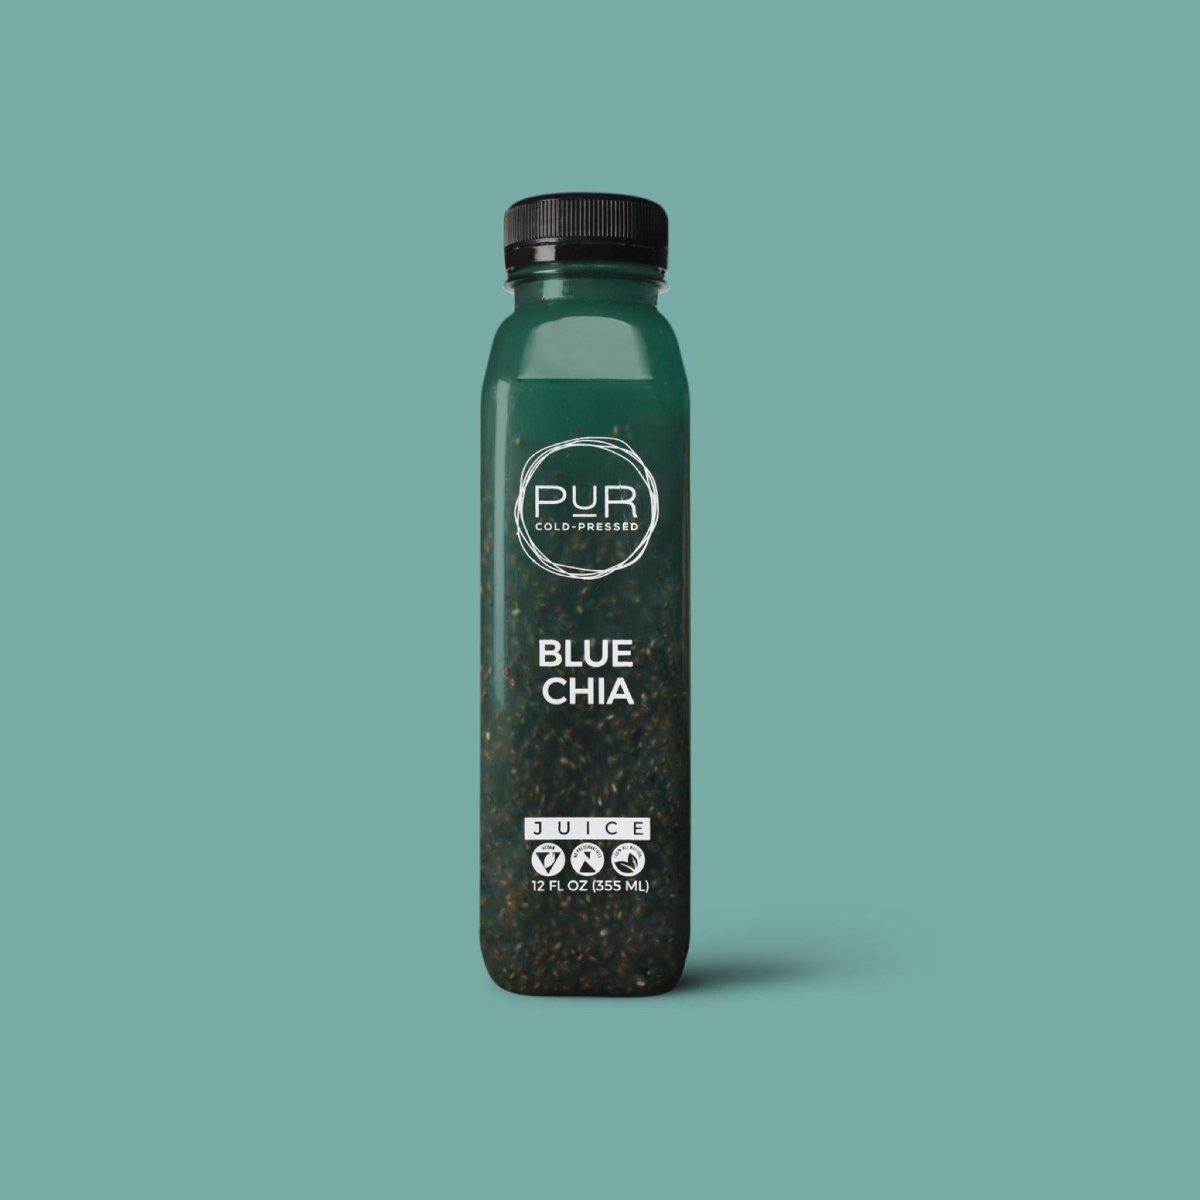 PUR juice cleanse cold pressed juice DISCOVERY - JUICE KIT Juice Cleanse Kit - Discovery Kit | Cold-Pressed Juice | PUR Juice Kit